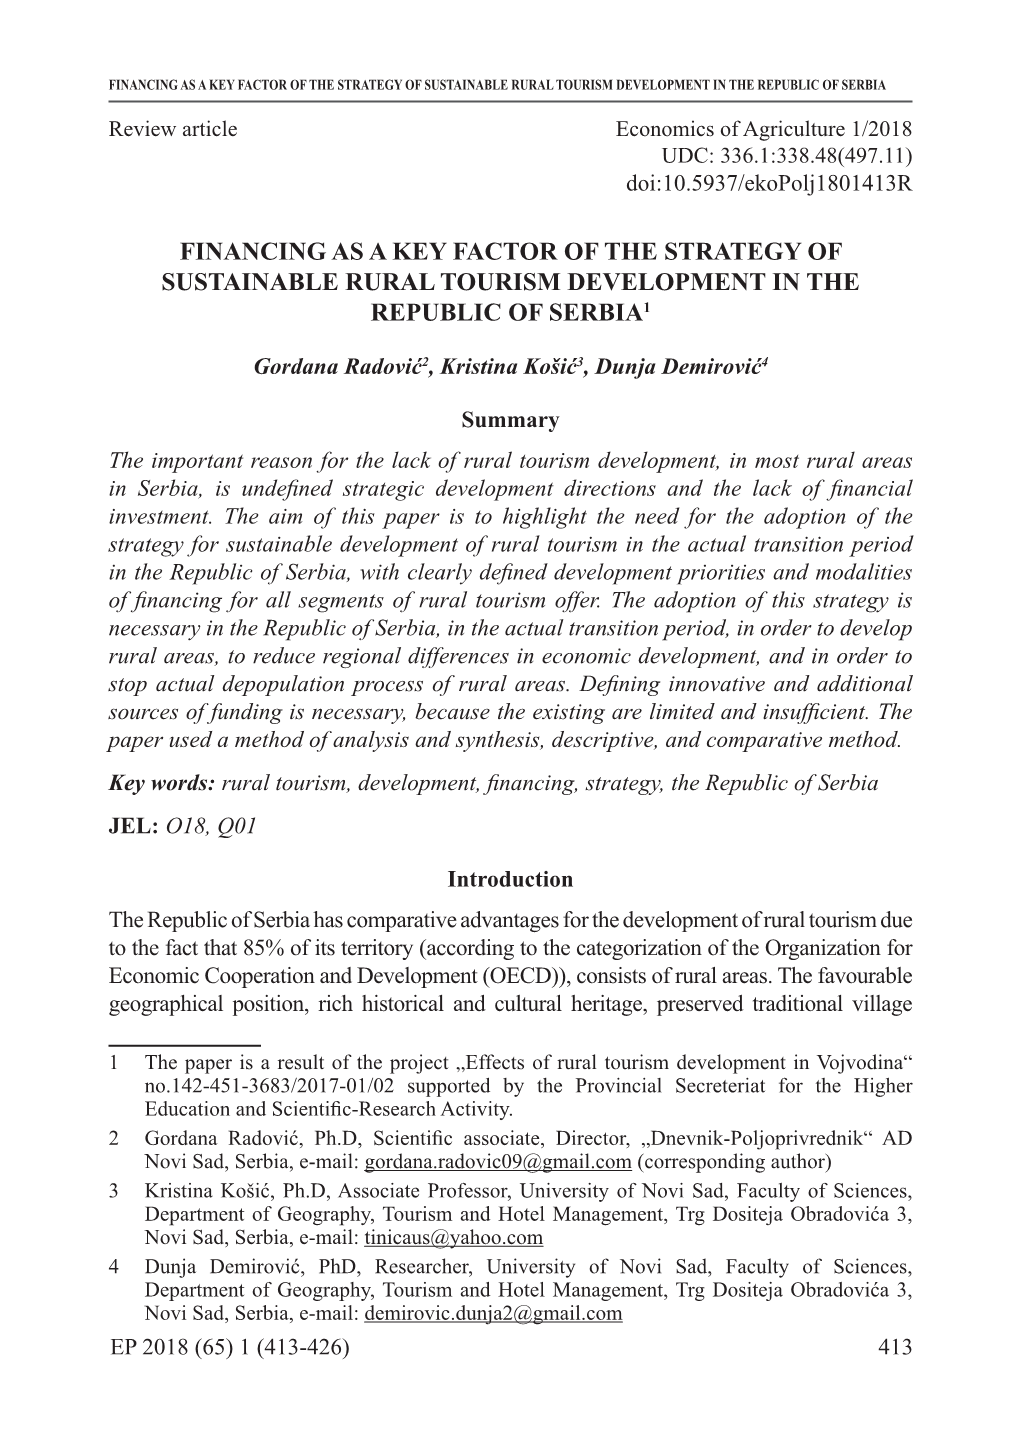 Financing As a Key Factor of the Strategy of Sustainable Rural Tourism Development in the Republic of Serbia